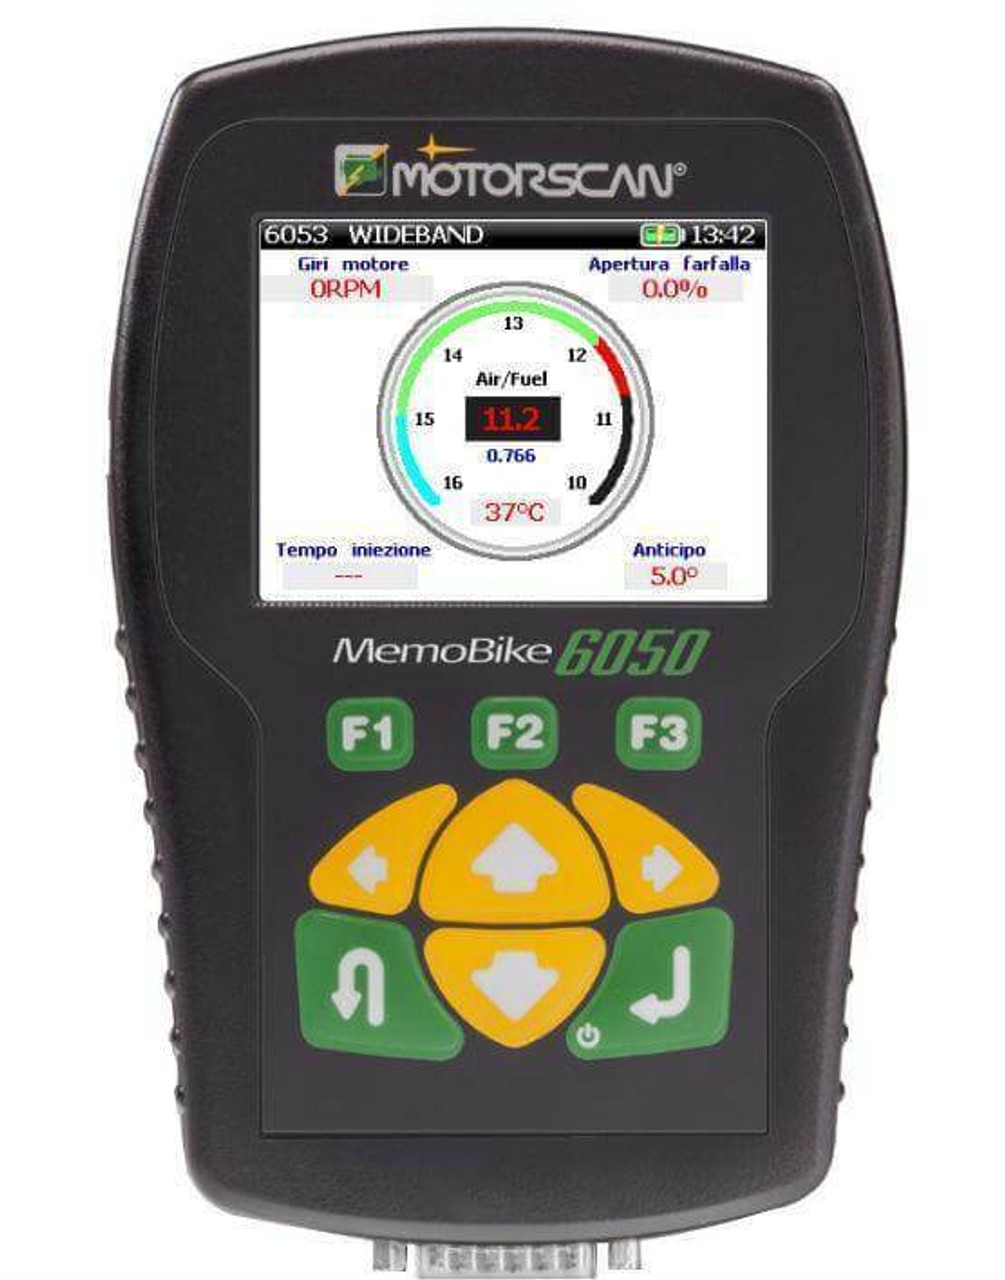 ANSED DIAGNOSTICS MS6050DMM MOTORCYCLE & POWERSPORTS DIAGNOSTIC SCAN TOOL KIT